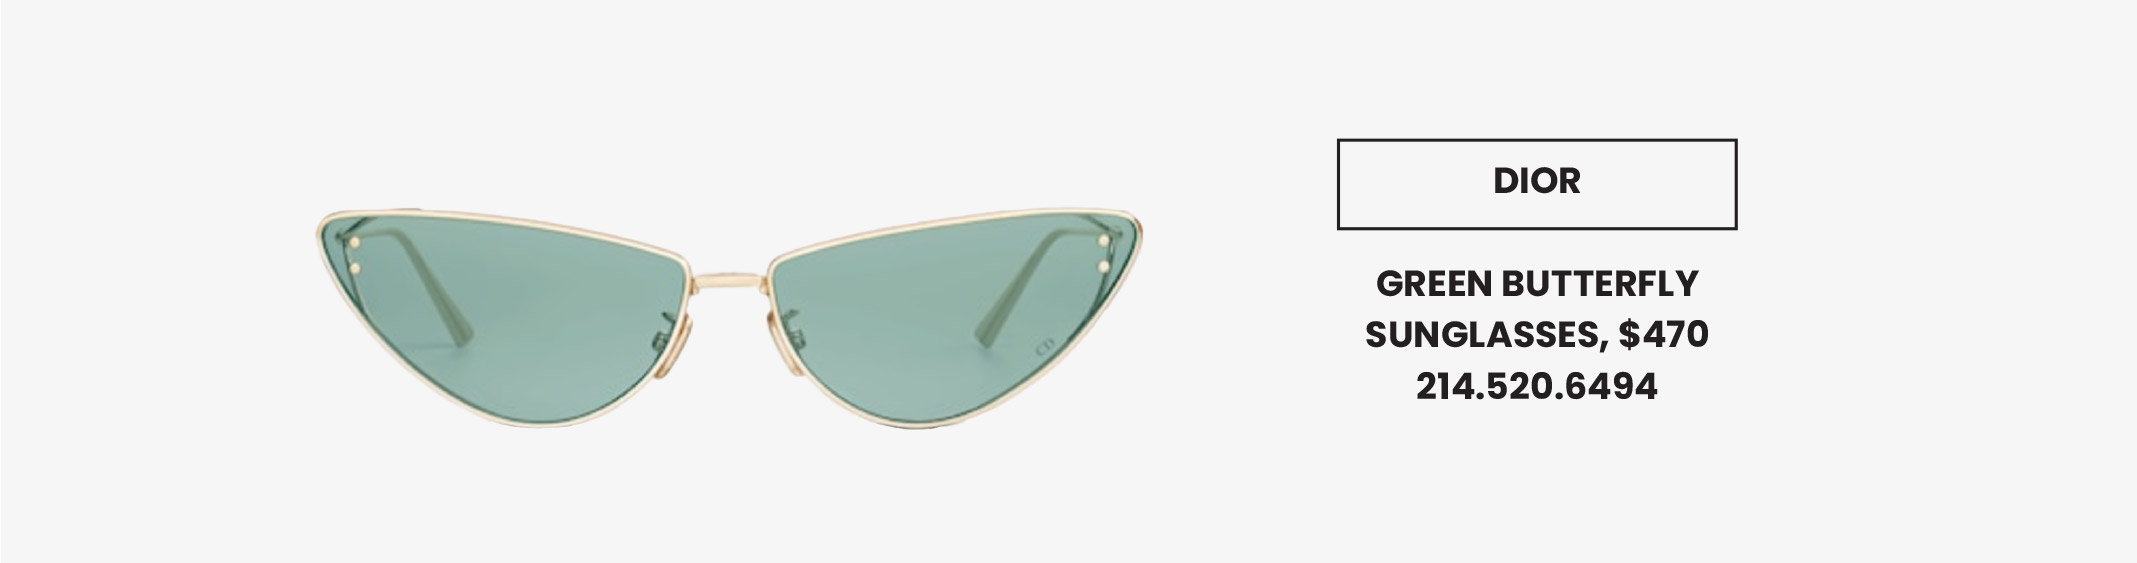 DIOR GREEN BUTTERFLY SUNGLASSES